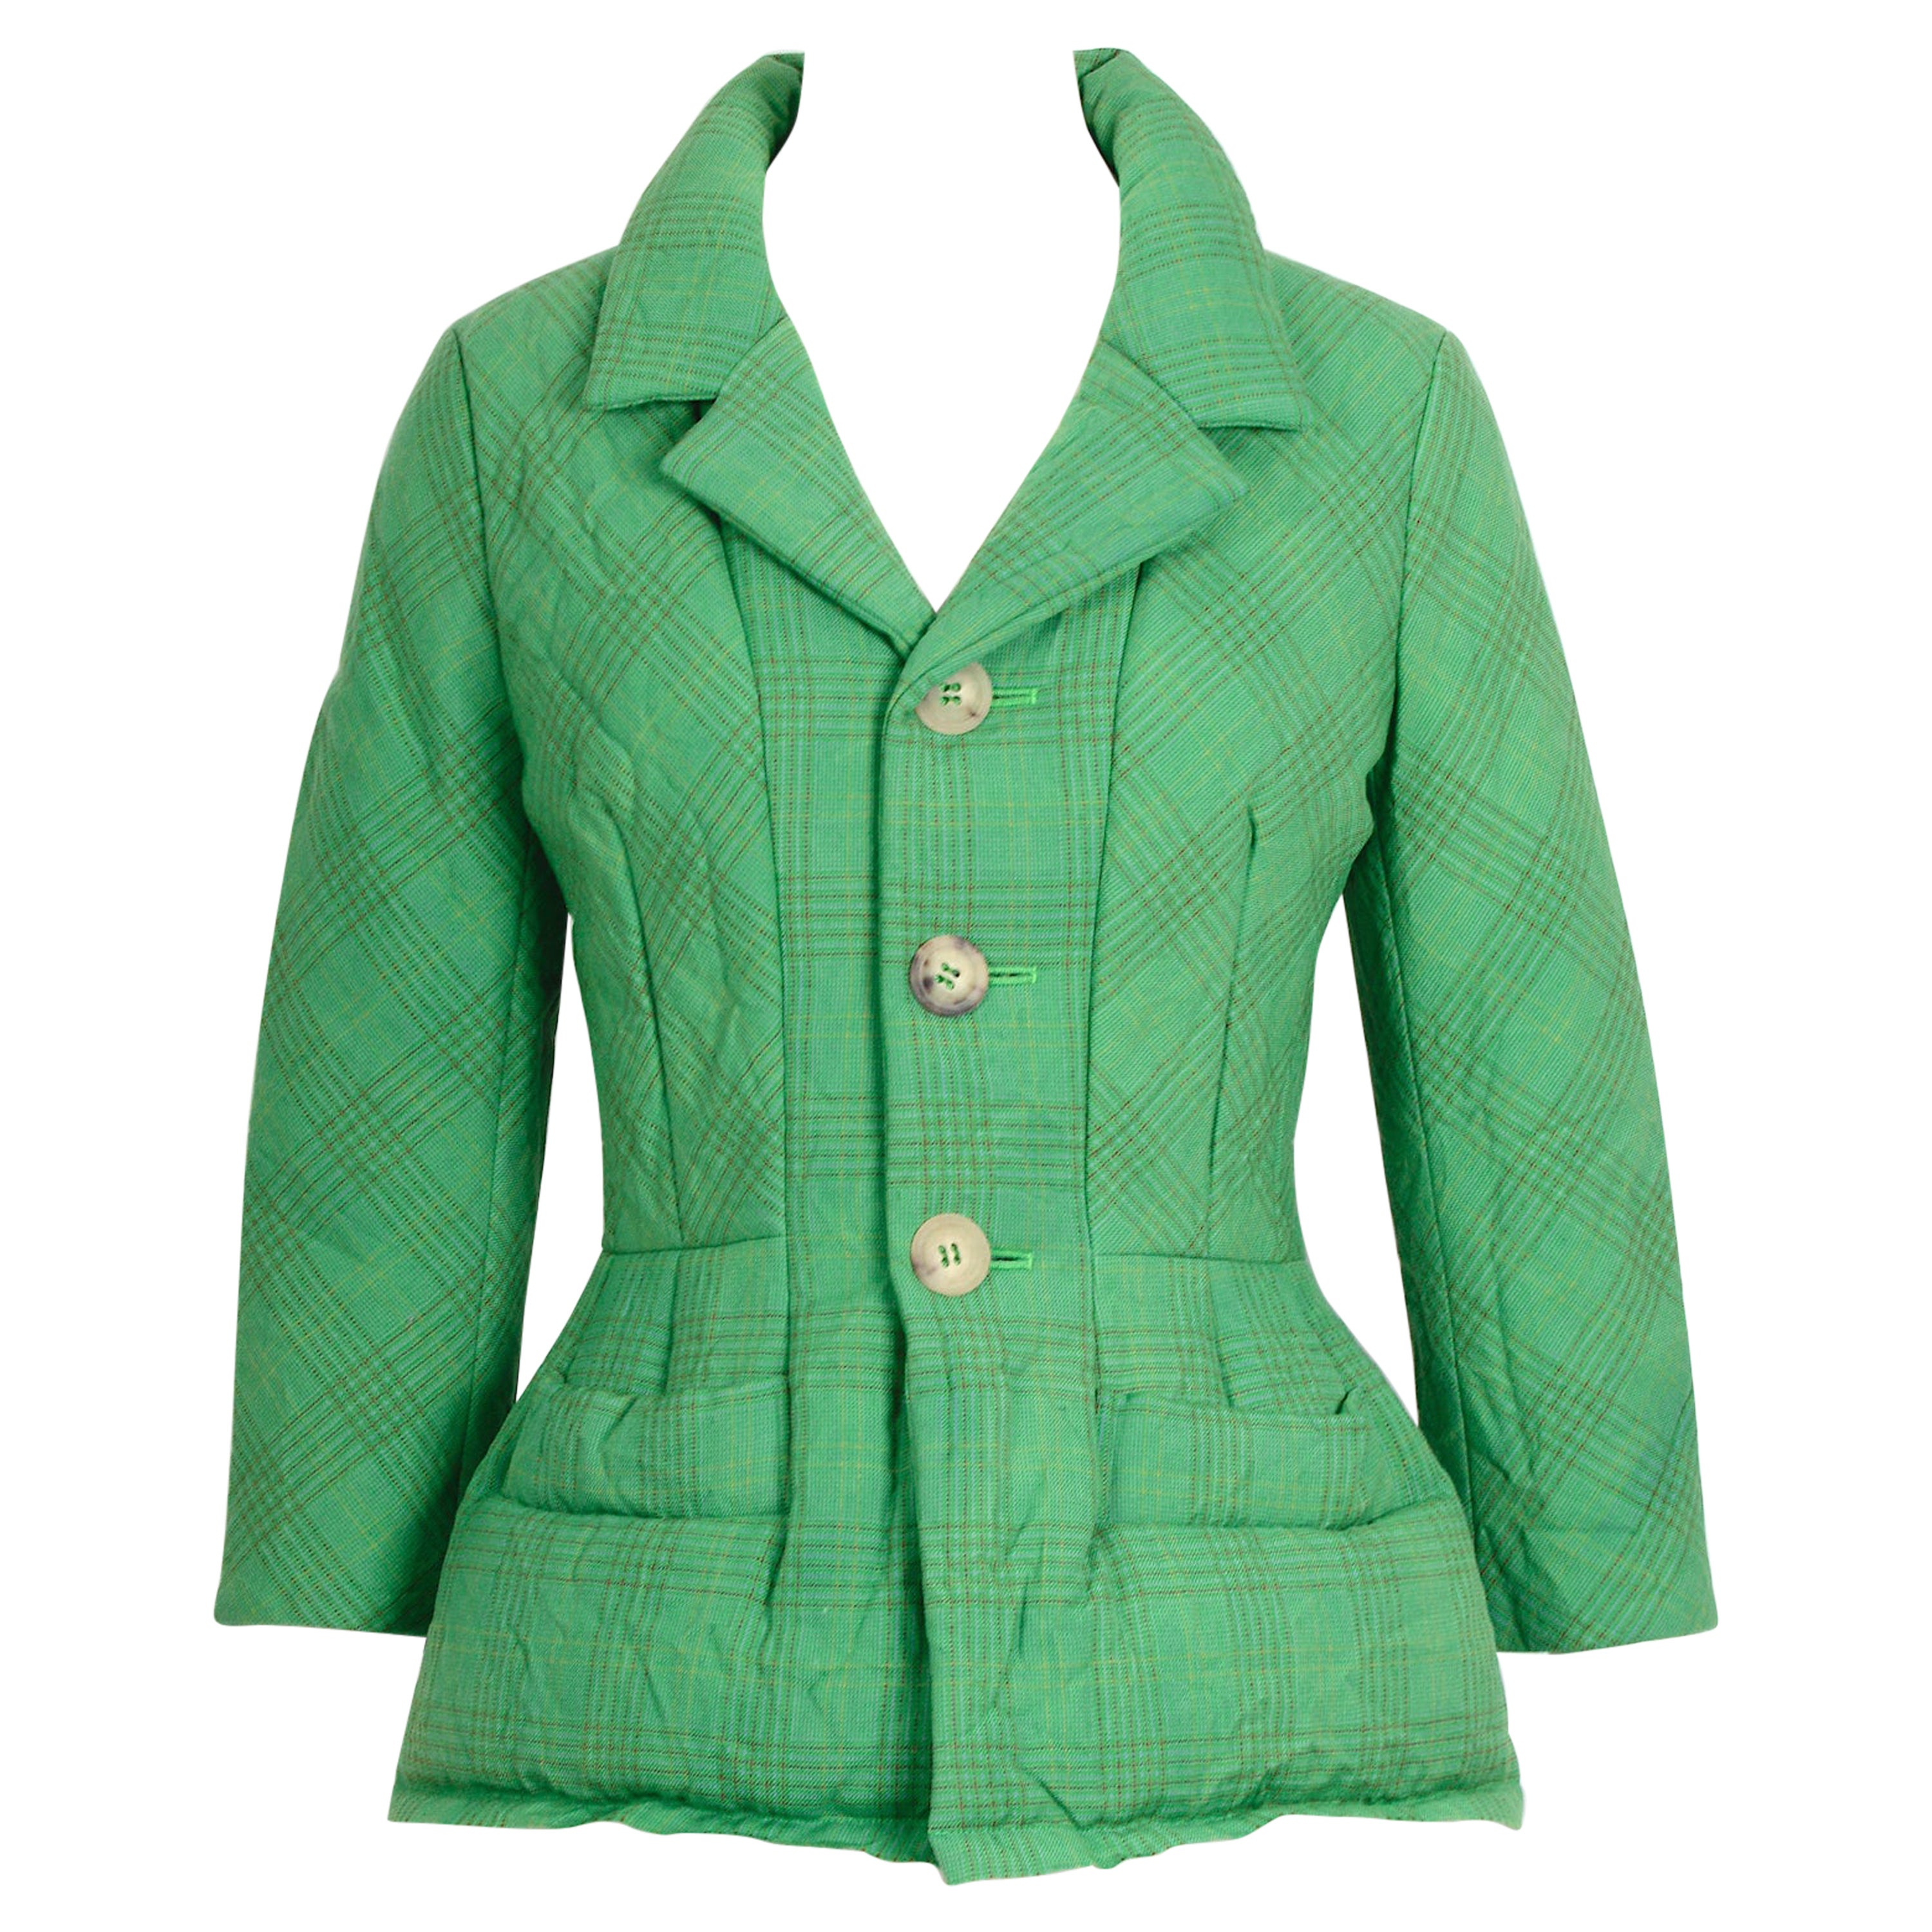 Comme des Garçons by Junya Watanabe vintage FW 2004 green padded basque jacket   For Sale